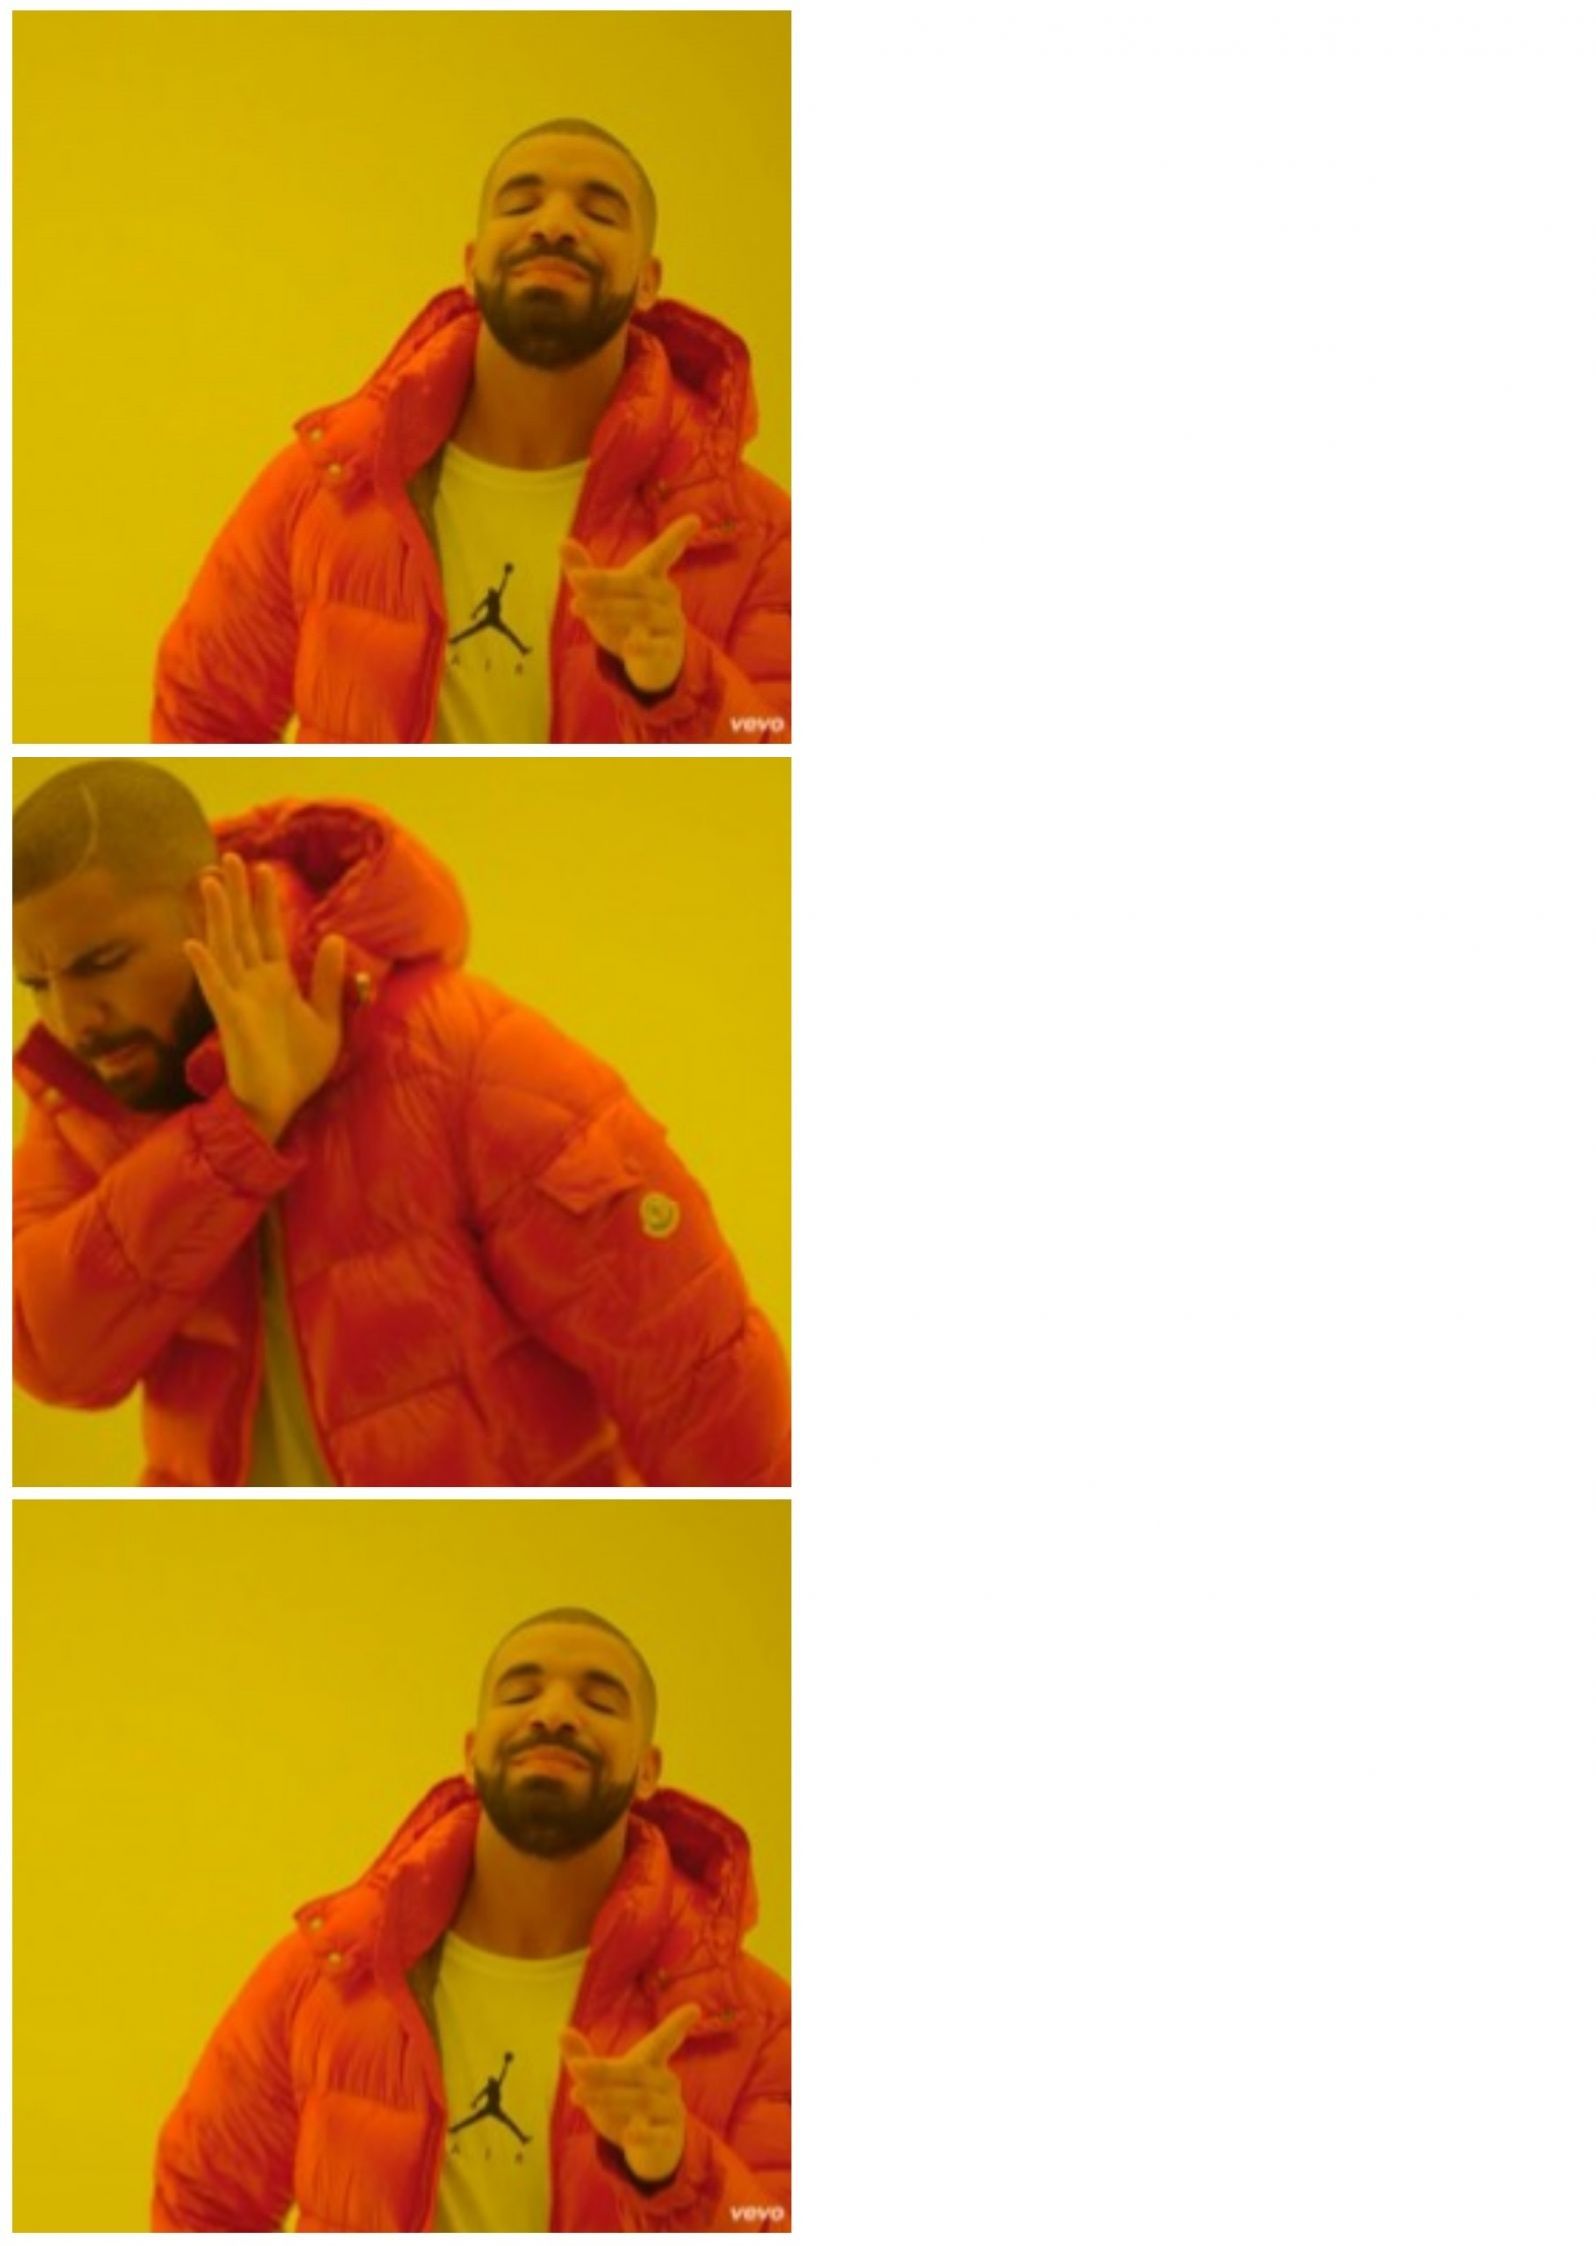 Drake Meme Template and Generator - Caption Now!